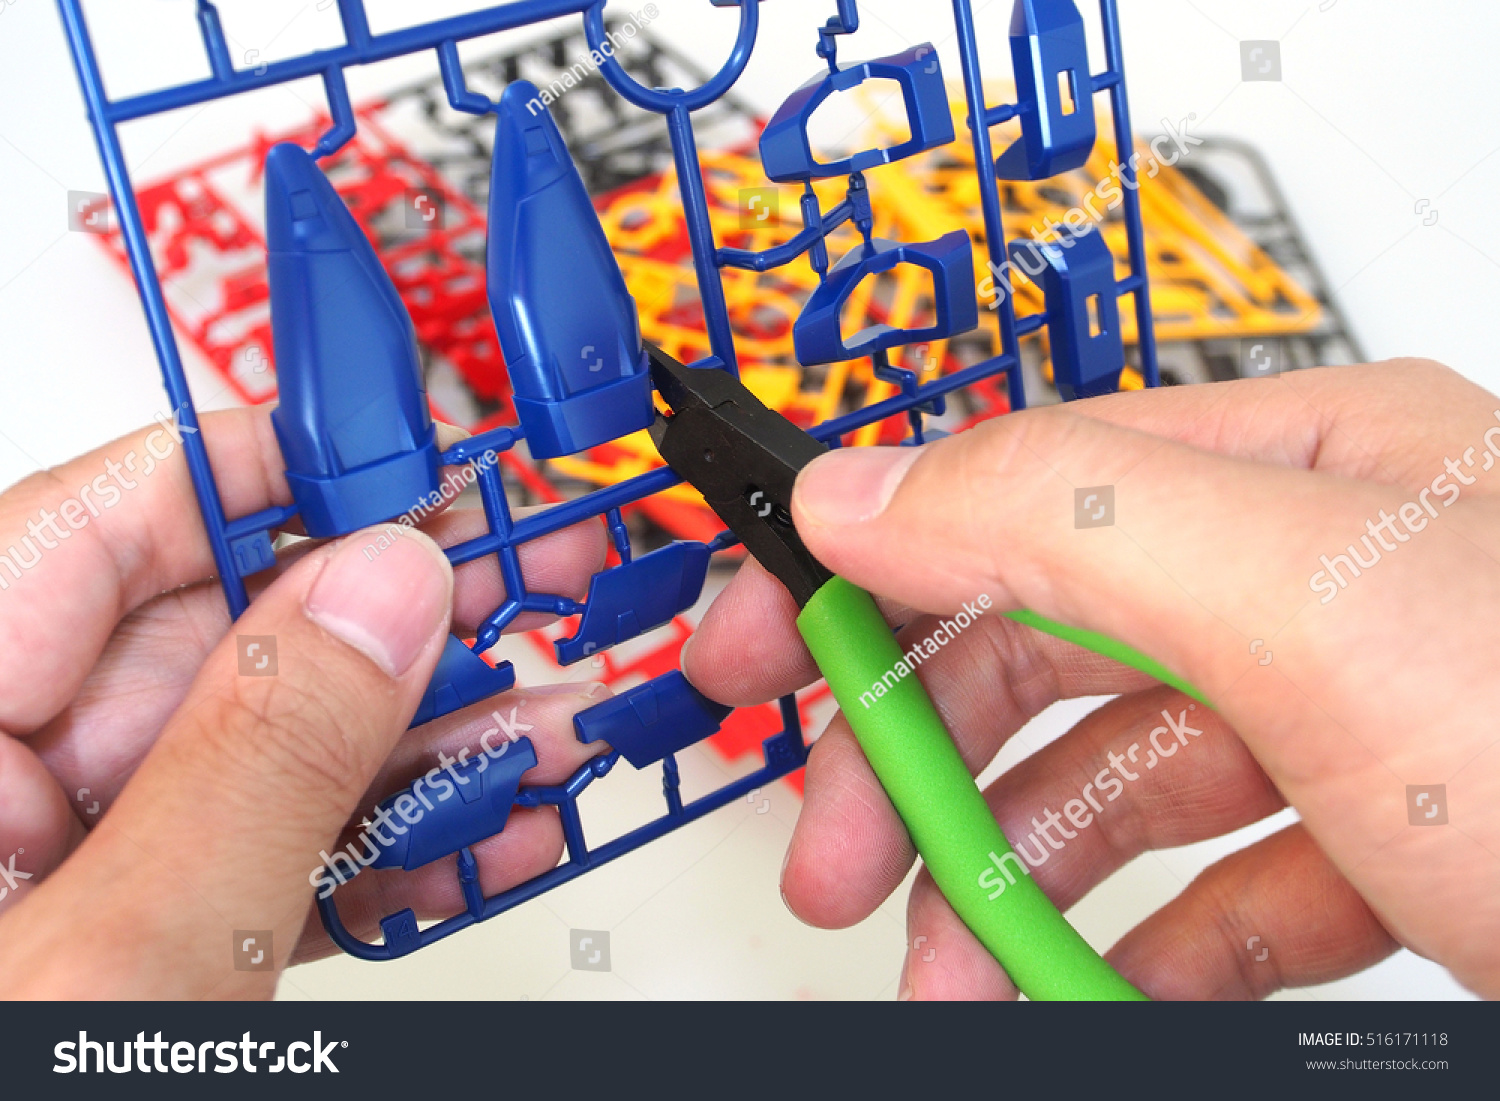 Man use nipper cutting a part of plastic model kit isolated on white background #516171118